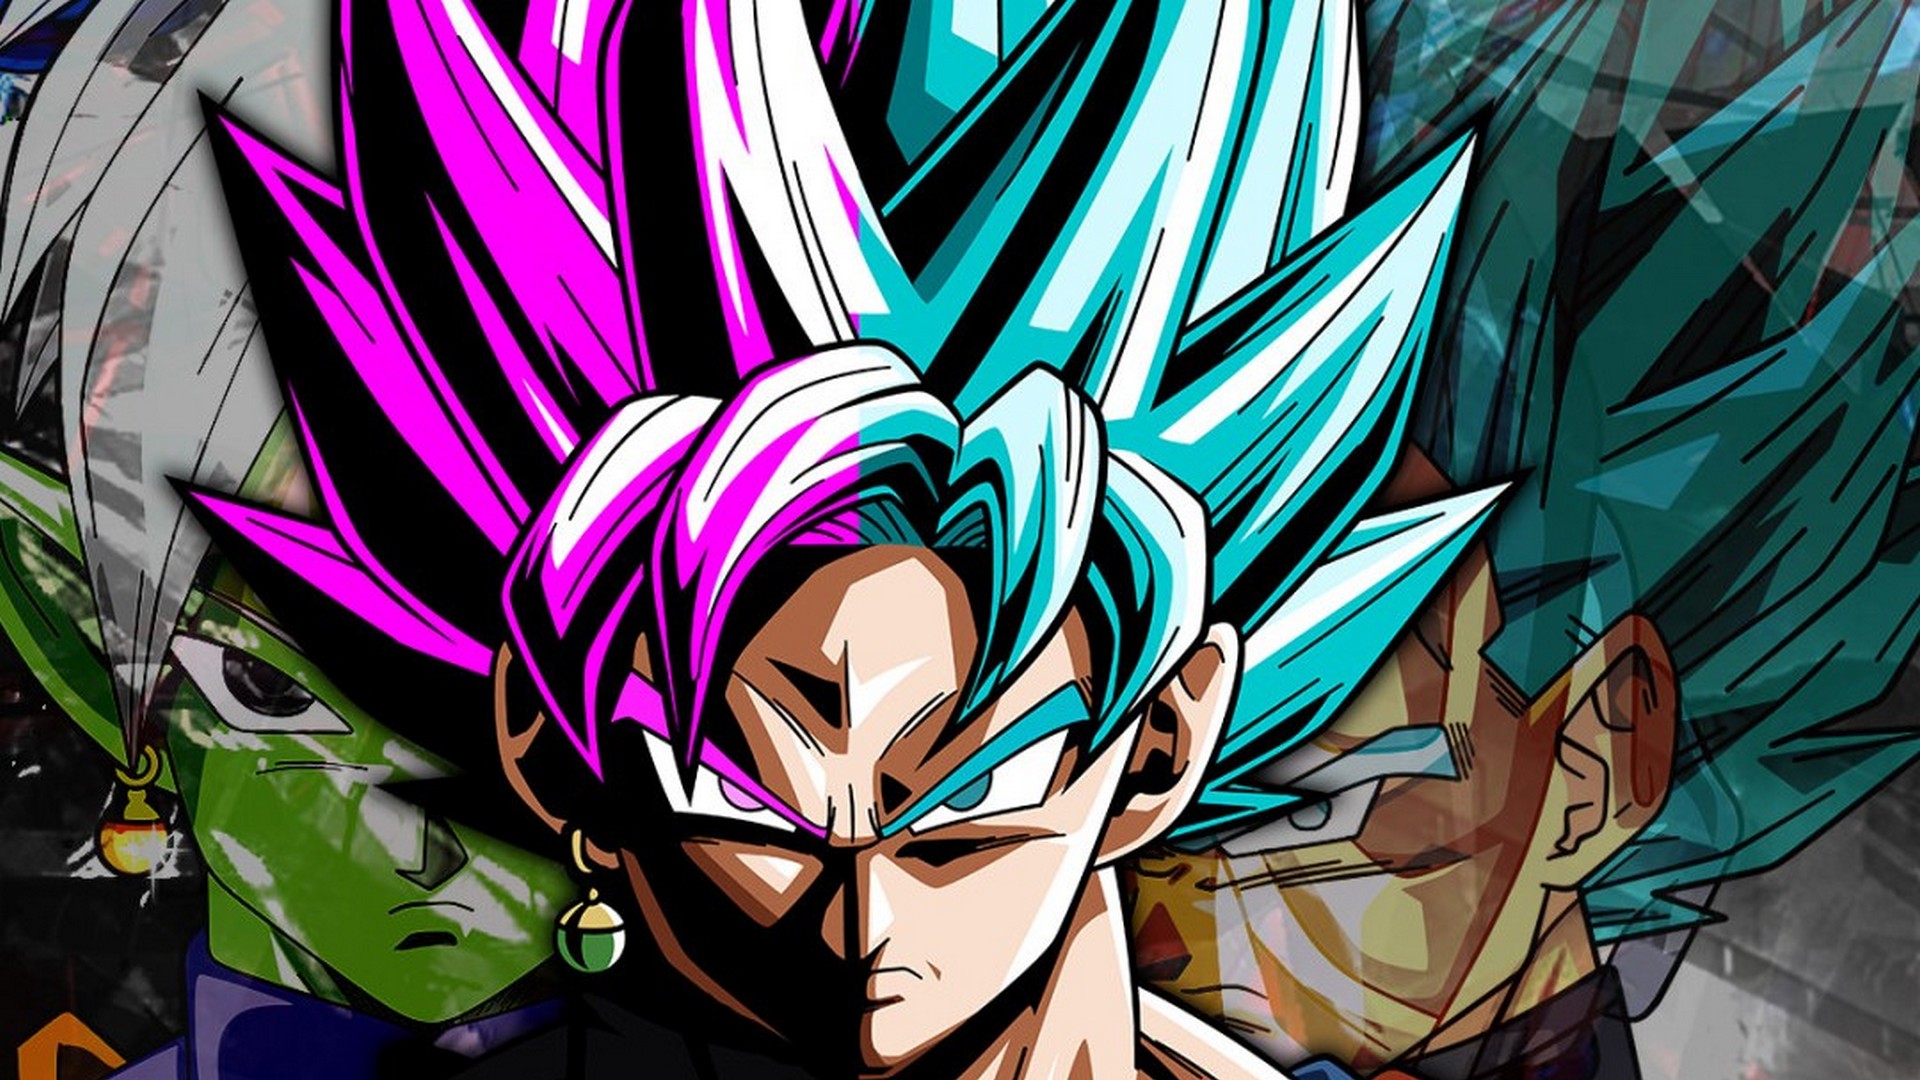 Black Goku Desktop Wallpaper with resolution 1920X1080 pixel. You can use this wallpaper as background for your desktop Computer Screensavers, Android or iPhone smartphones